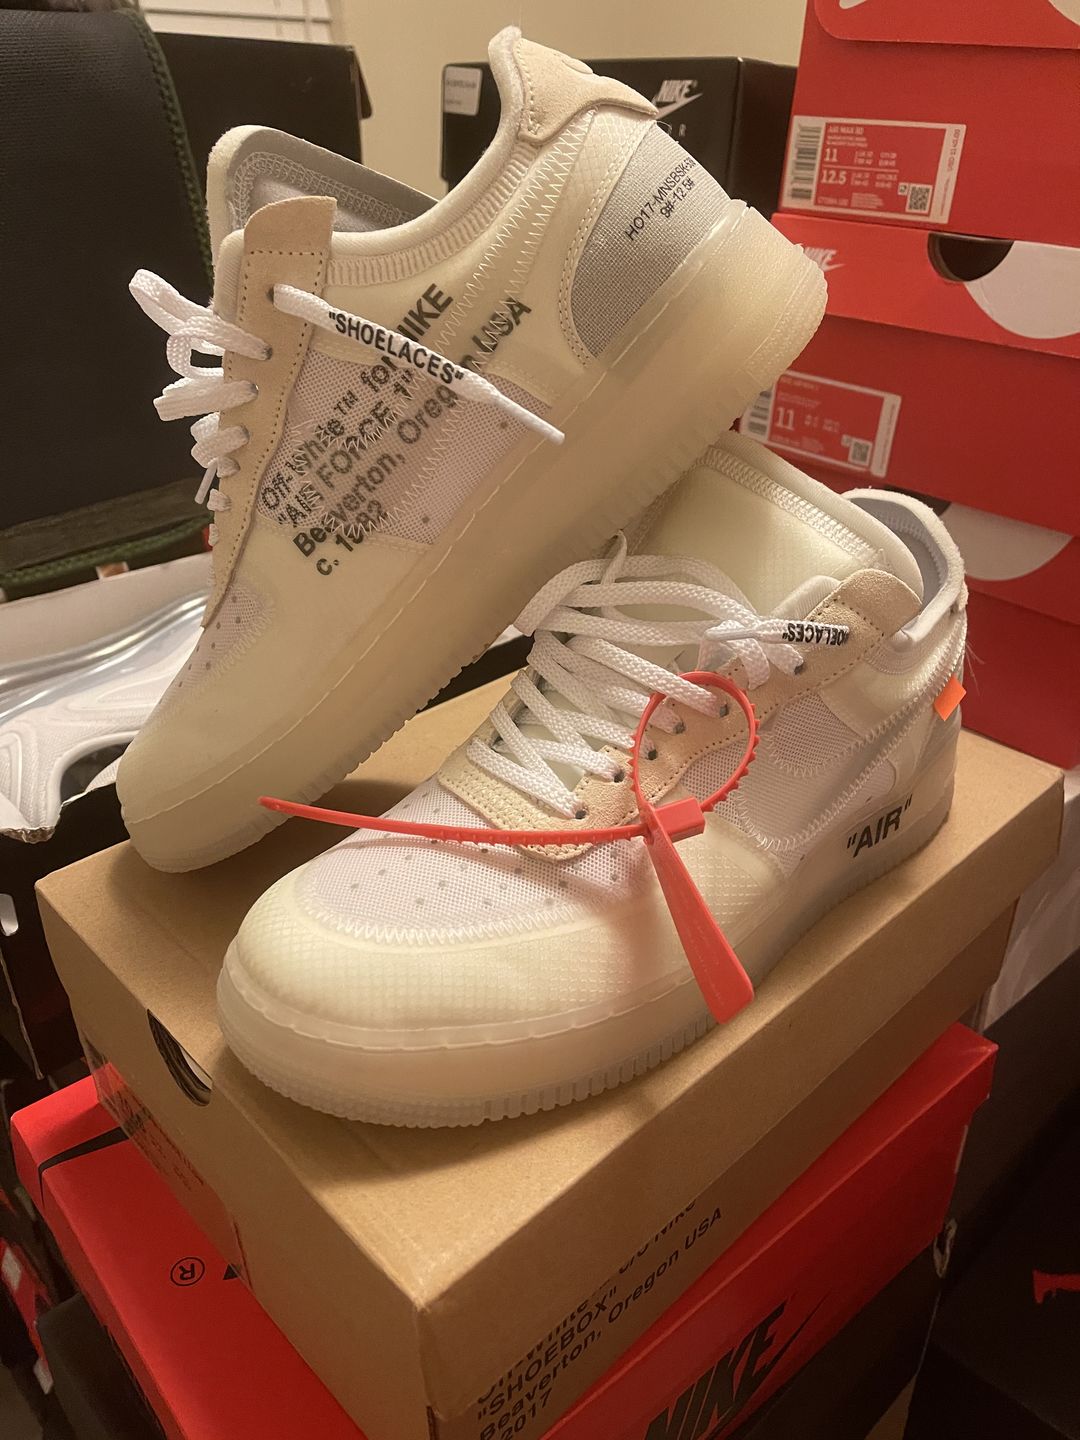 Paul M. Off-White x Nike Air Force 1 Low “The Ten”